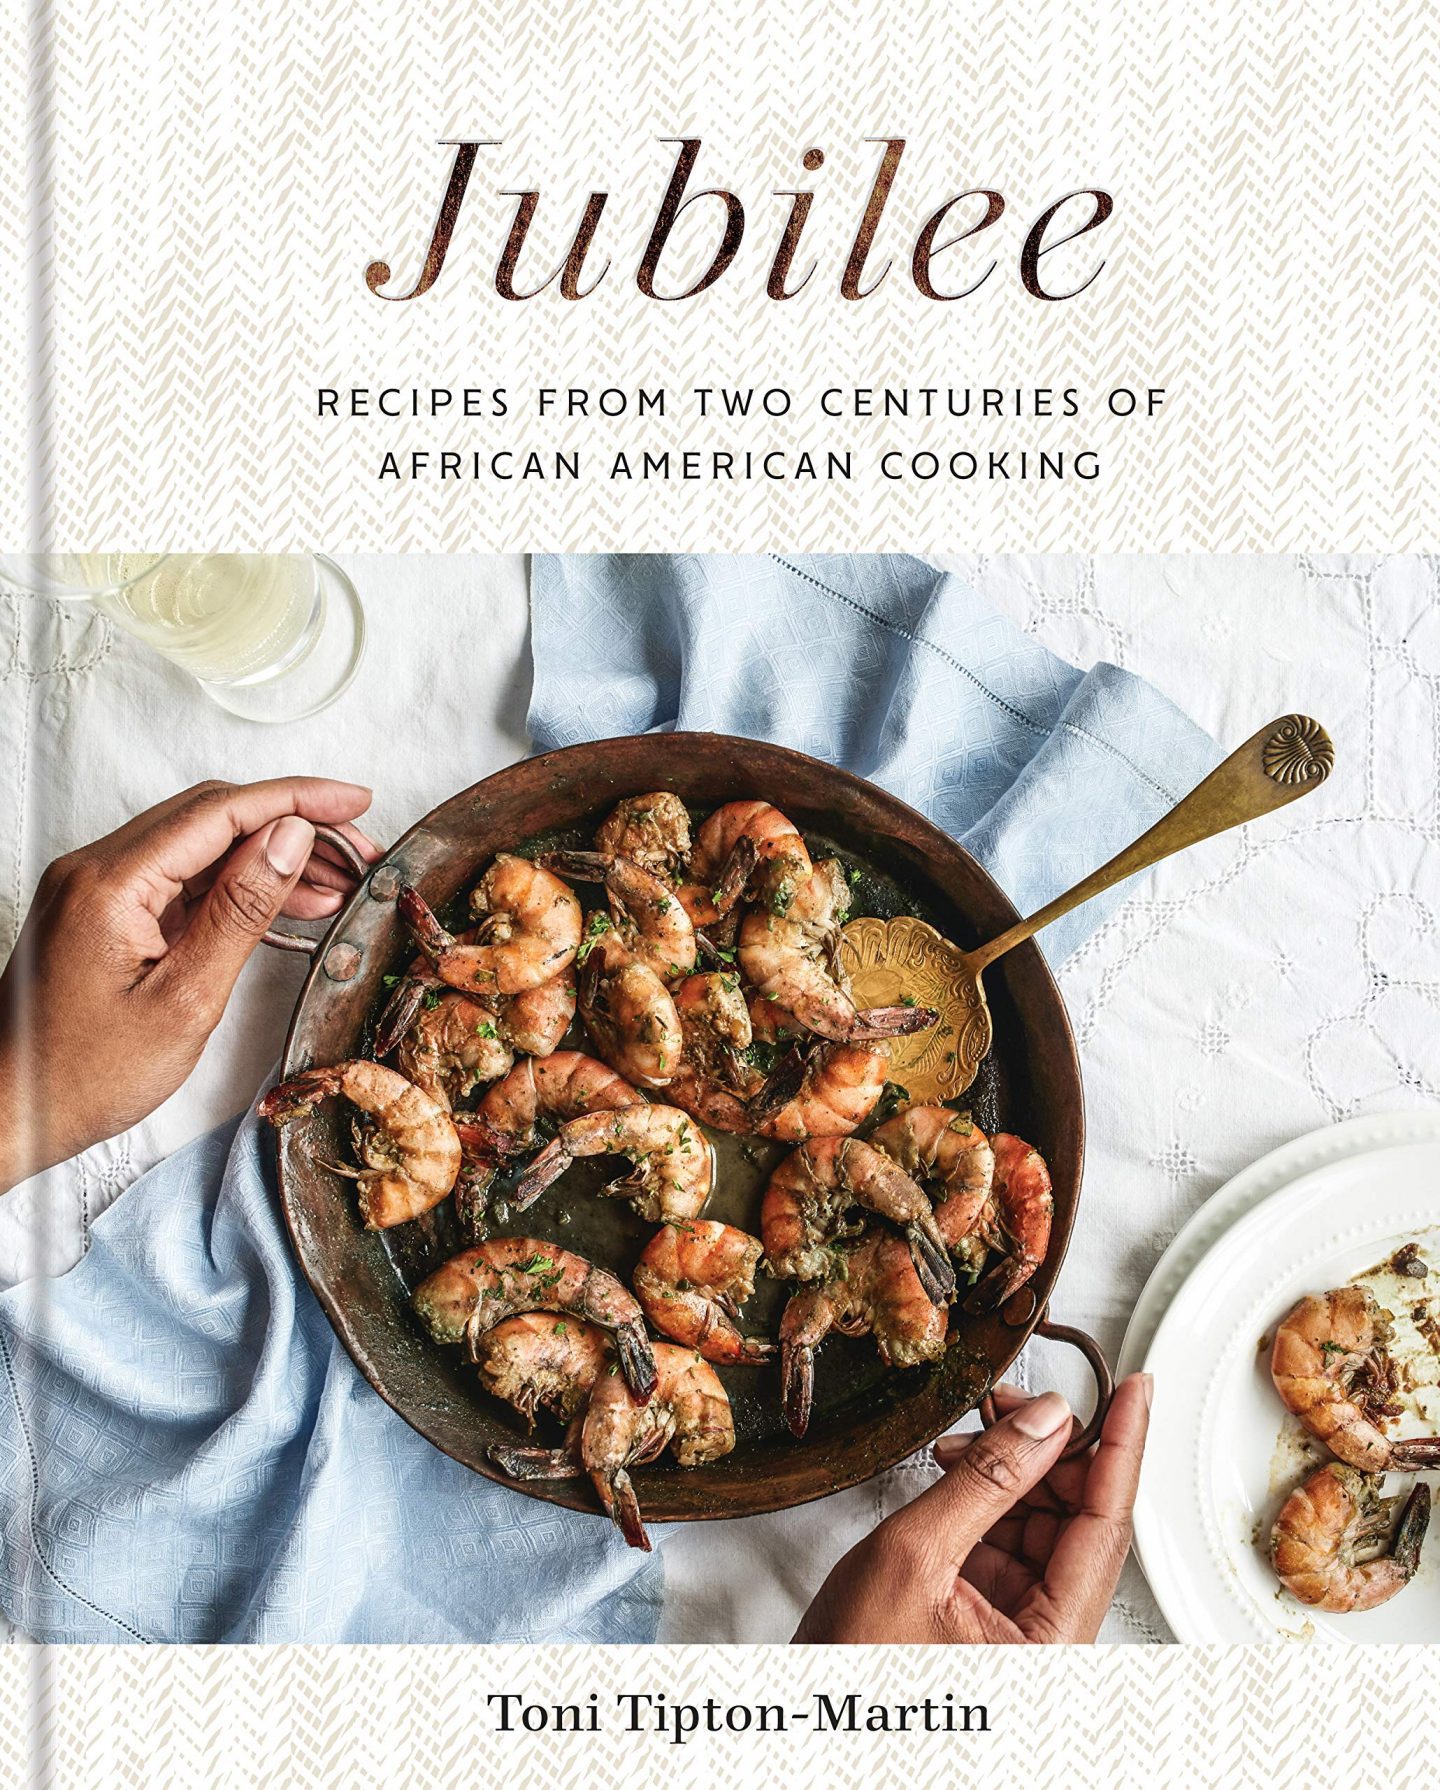 Black Food Heritage Books to Add To Your Kitchen Library